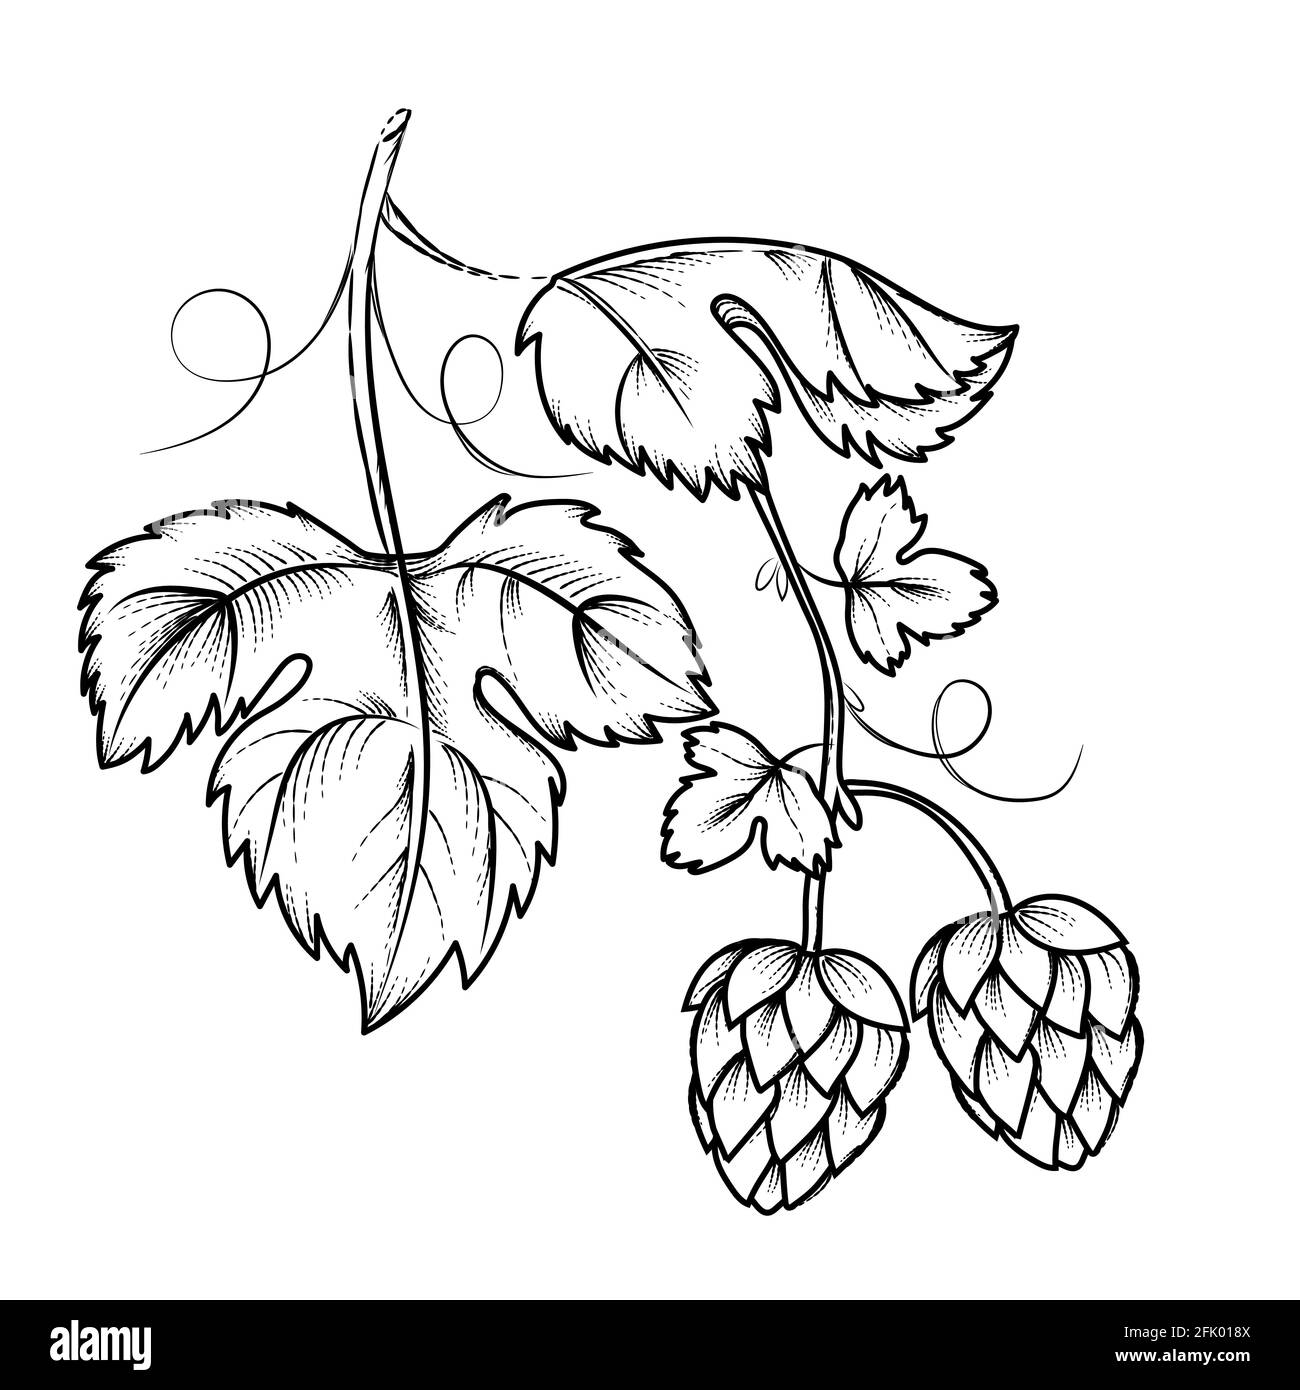 Hop plant hand drawn image, engraving vintage vector illustration isolated on white background. Hop botanical element for label brewery of beer packag Stock Vector